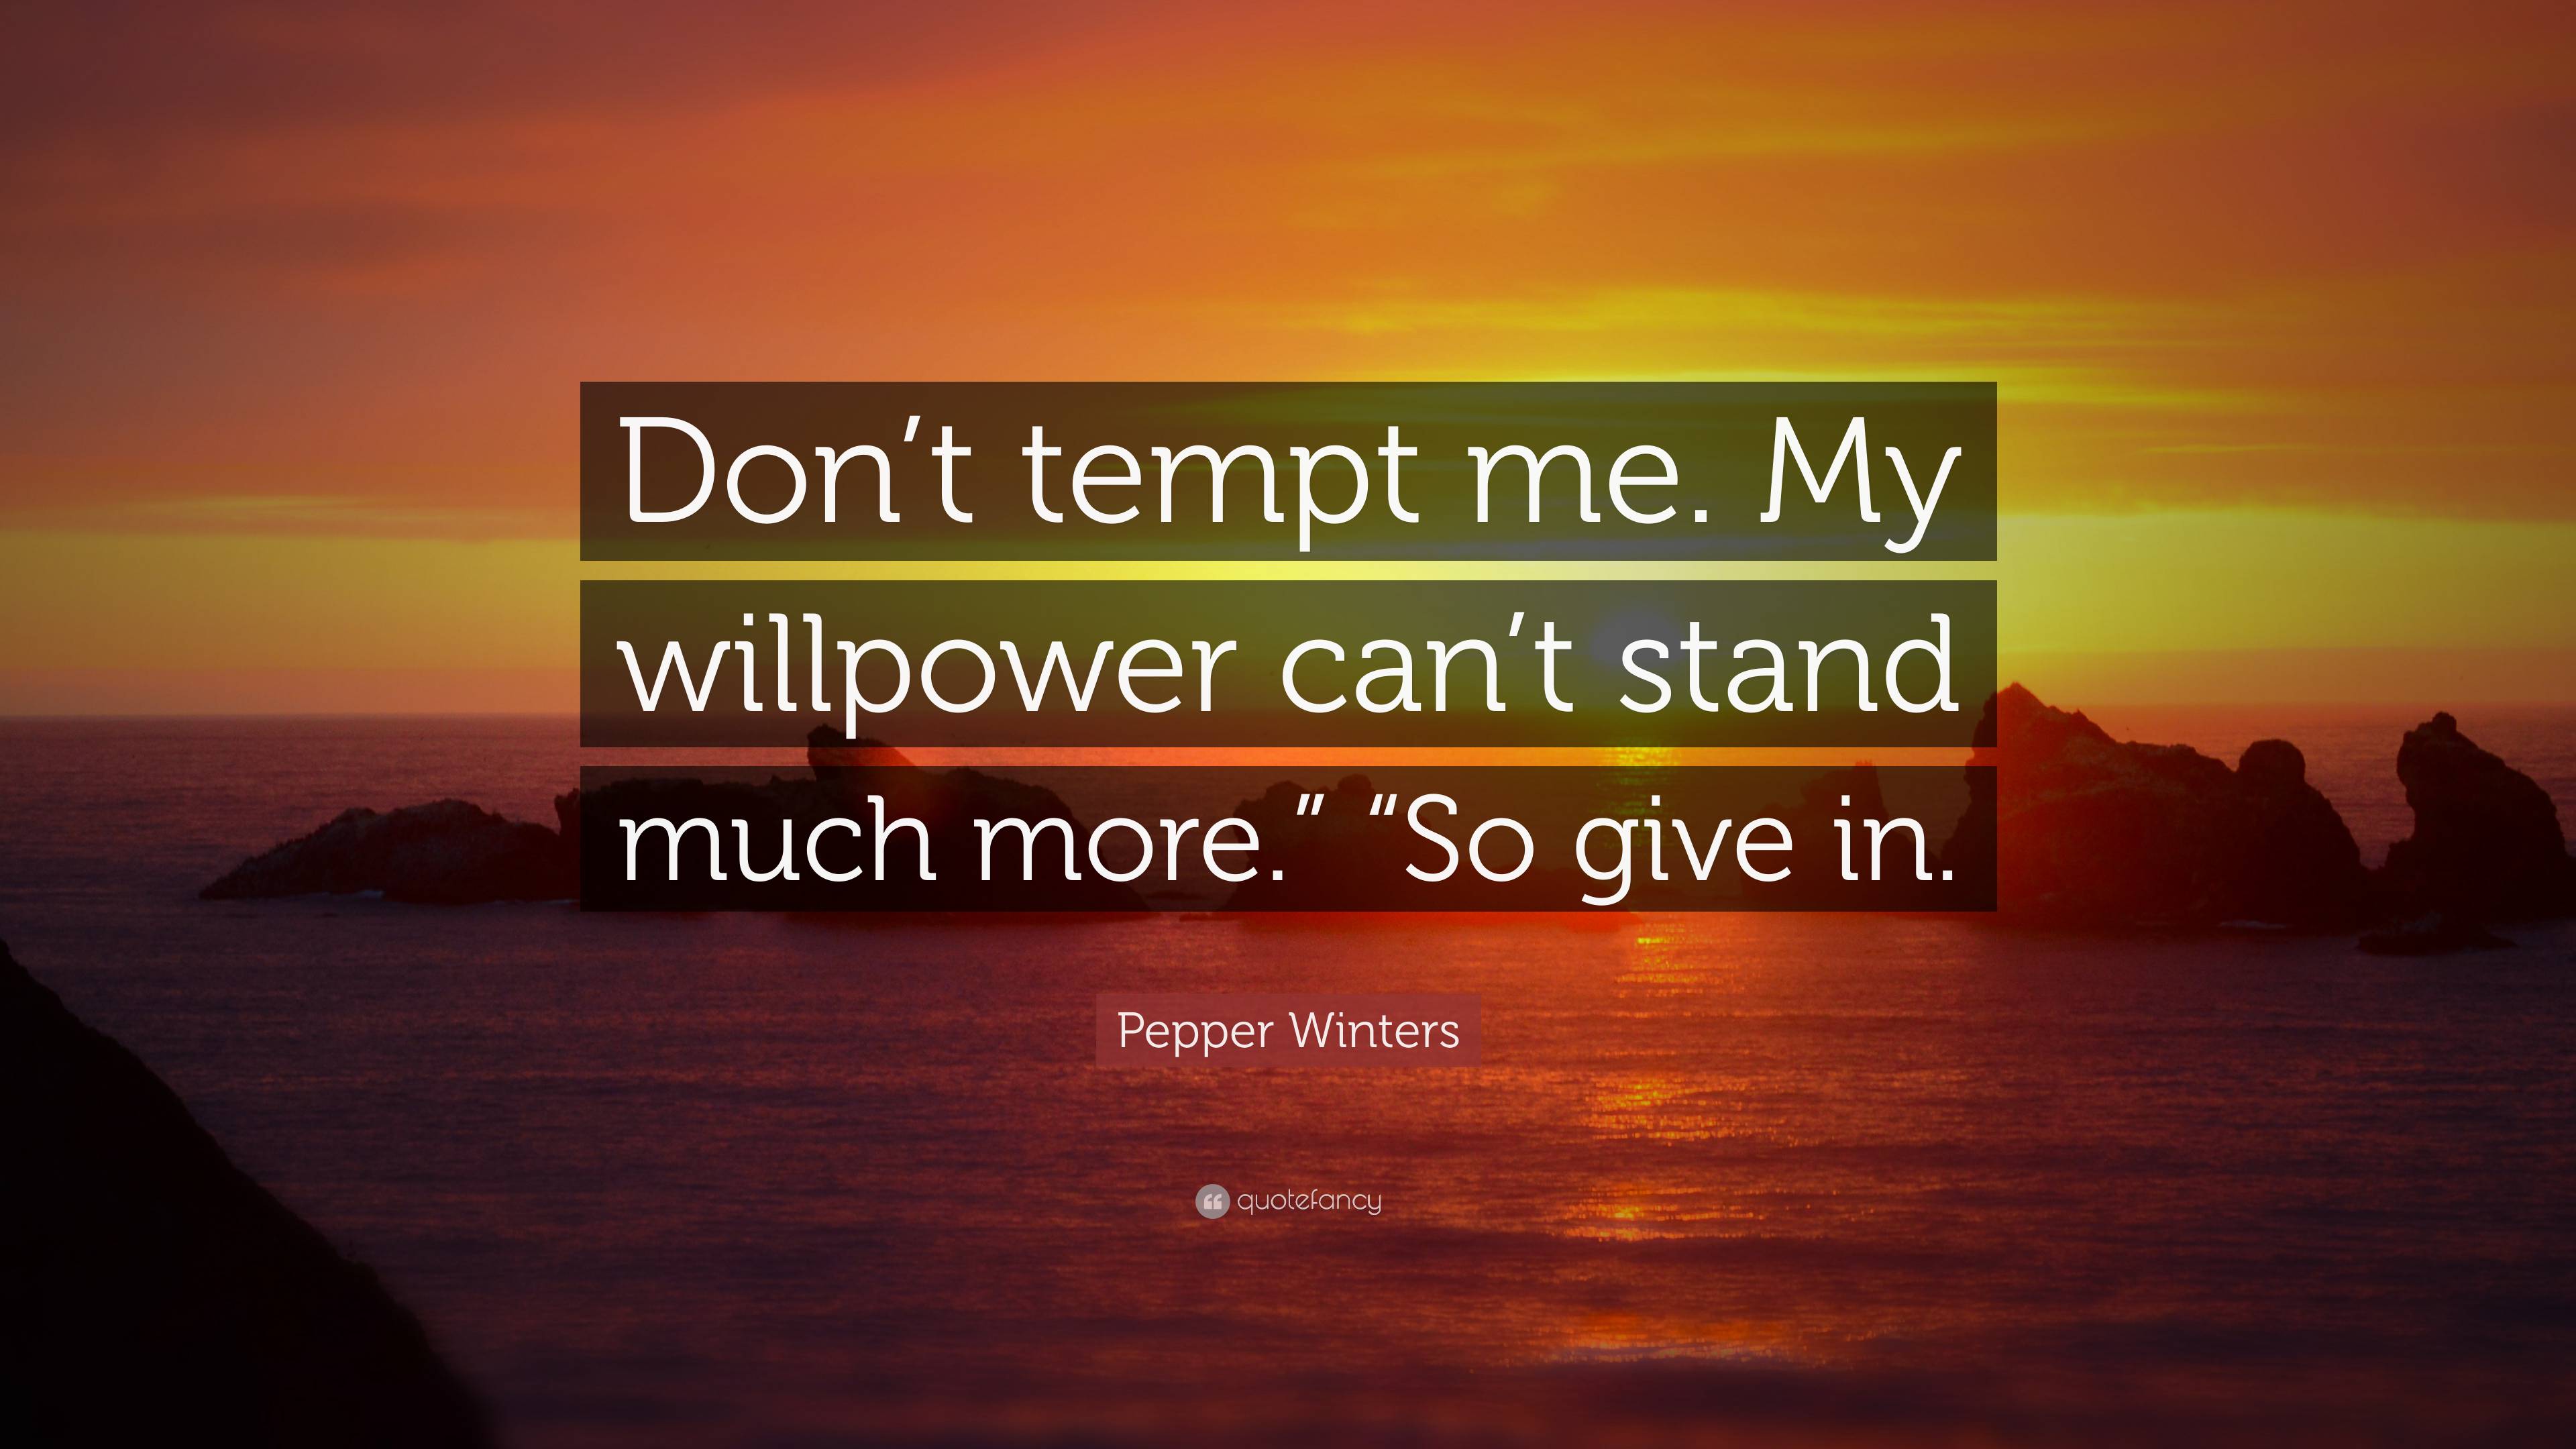 https://quotefancy.com/media/wallpaper/3840x2160/7533600-Pepper-Winters-Quote-Don-t-tempt-me-My-willpower-can-t-stand-much.jpg